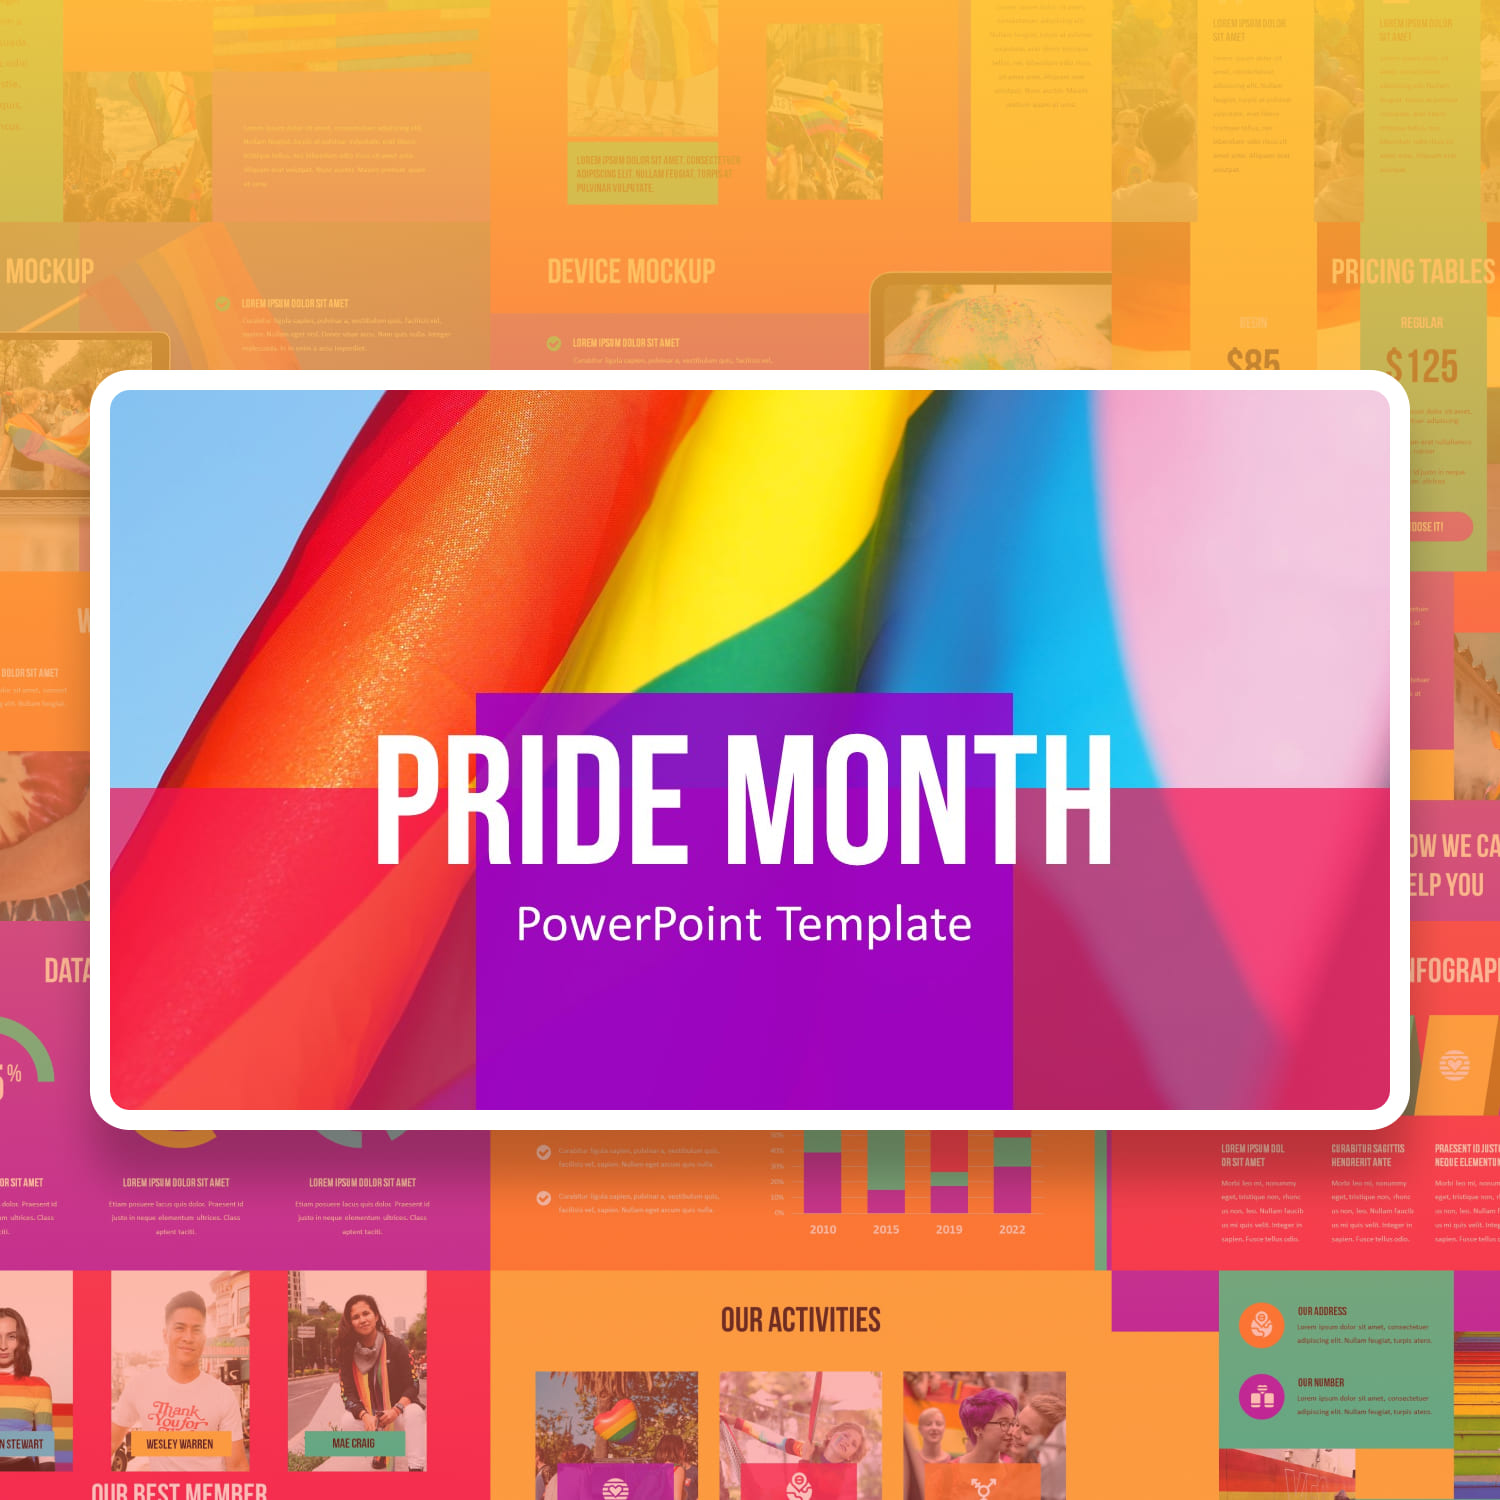 Pride month powerpoint template.